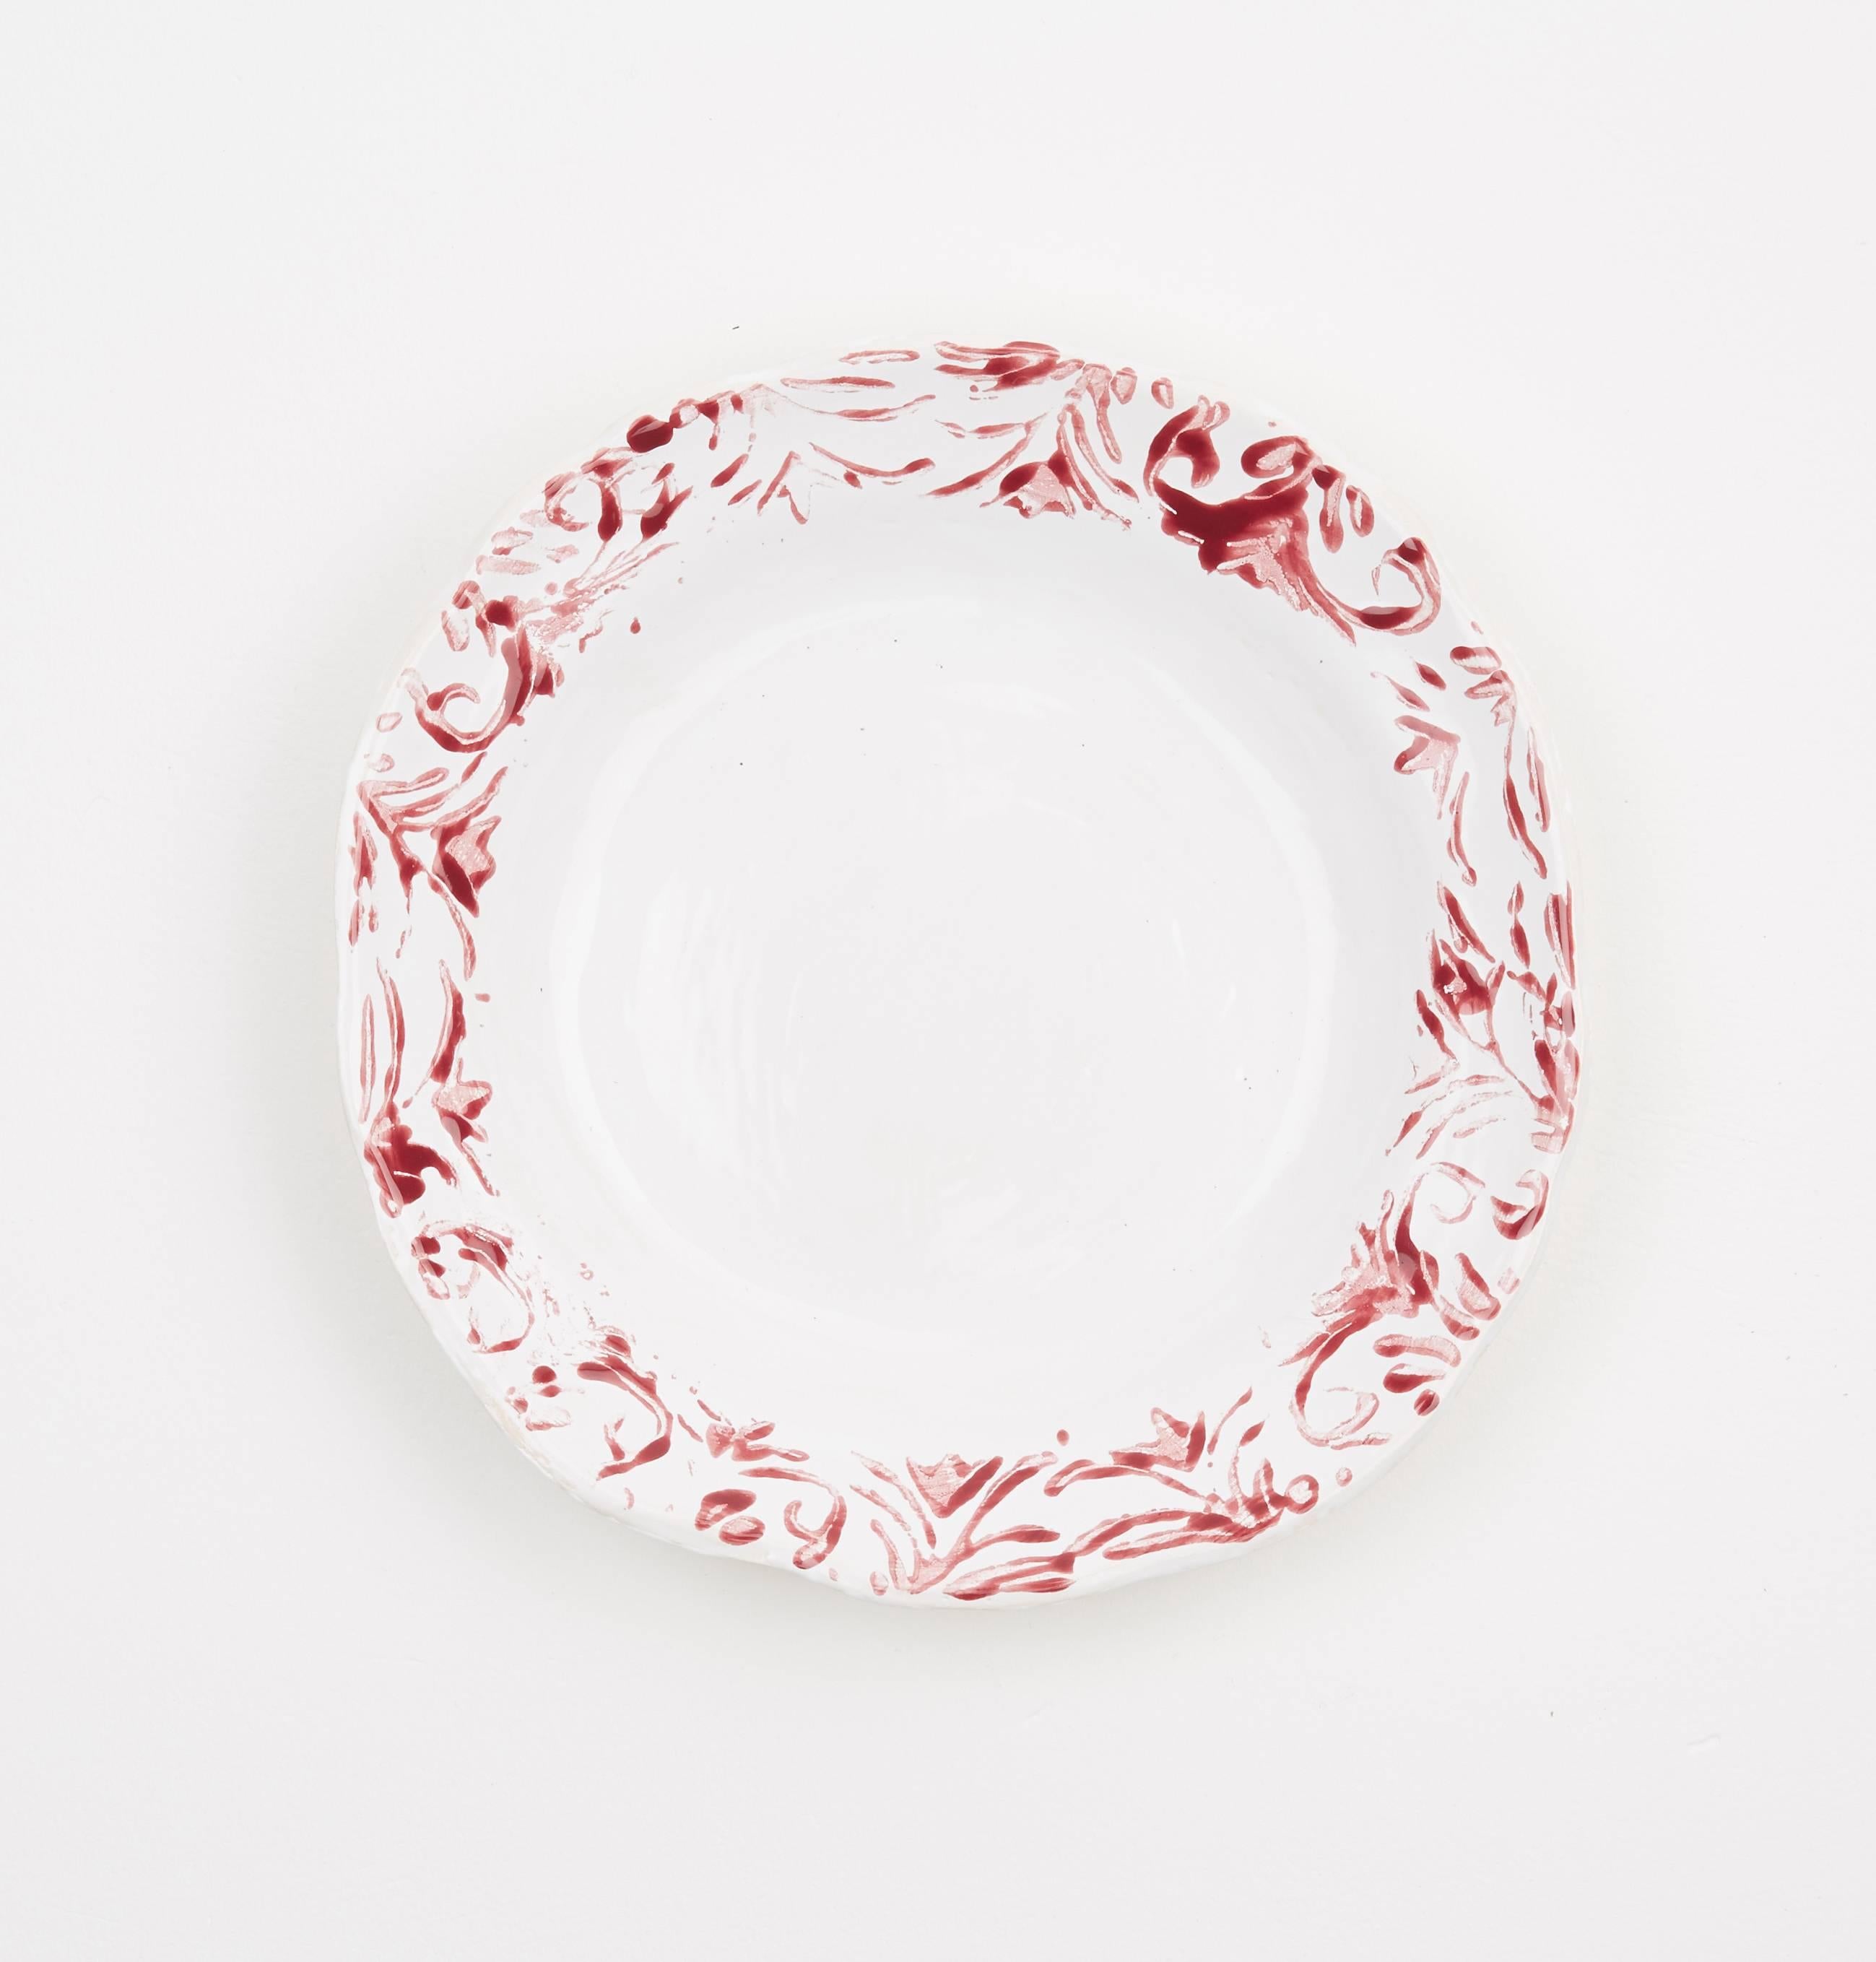 Hand printed red and white dessert plates, set of four. 

These ceramic plates are handmade and hand-painted by Zsuzsanna Nyul in Gloucestershire. They are high fired stoneware pieces with different designs created using an unique technique. The